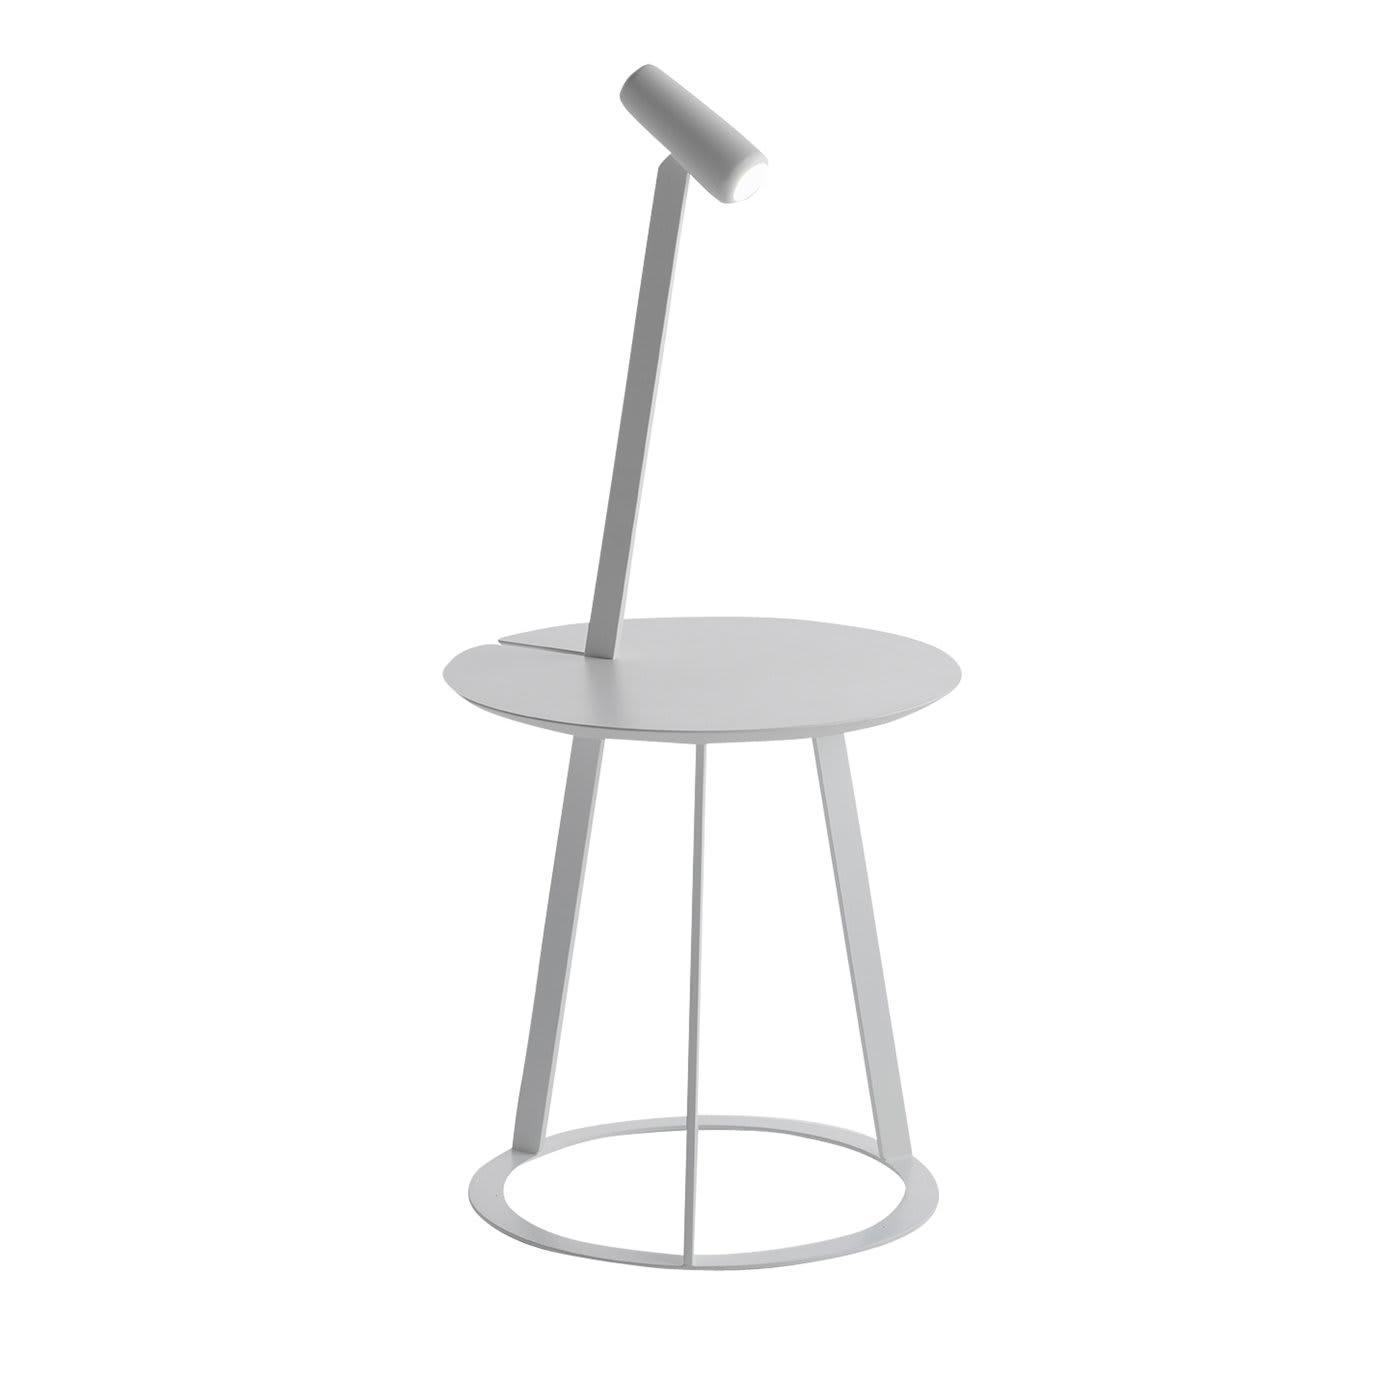 Albino Torcia White Side Table by Salvatore Indriolo - Horm